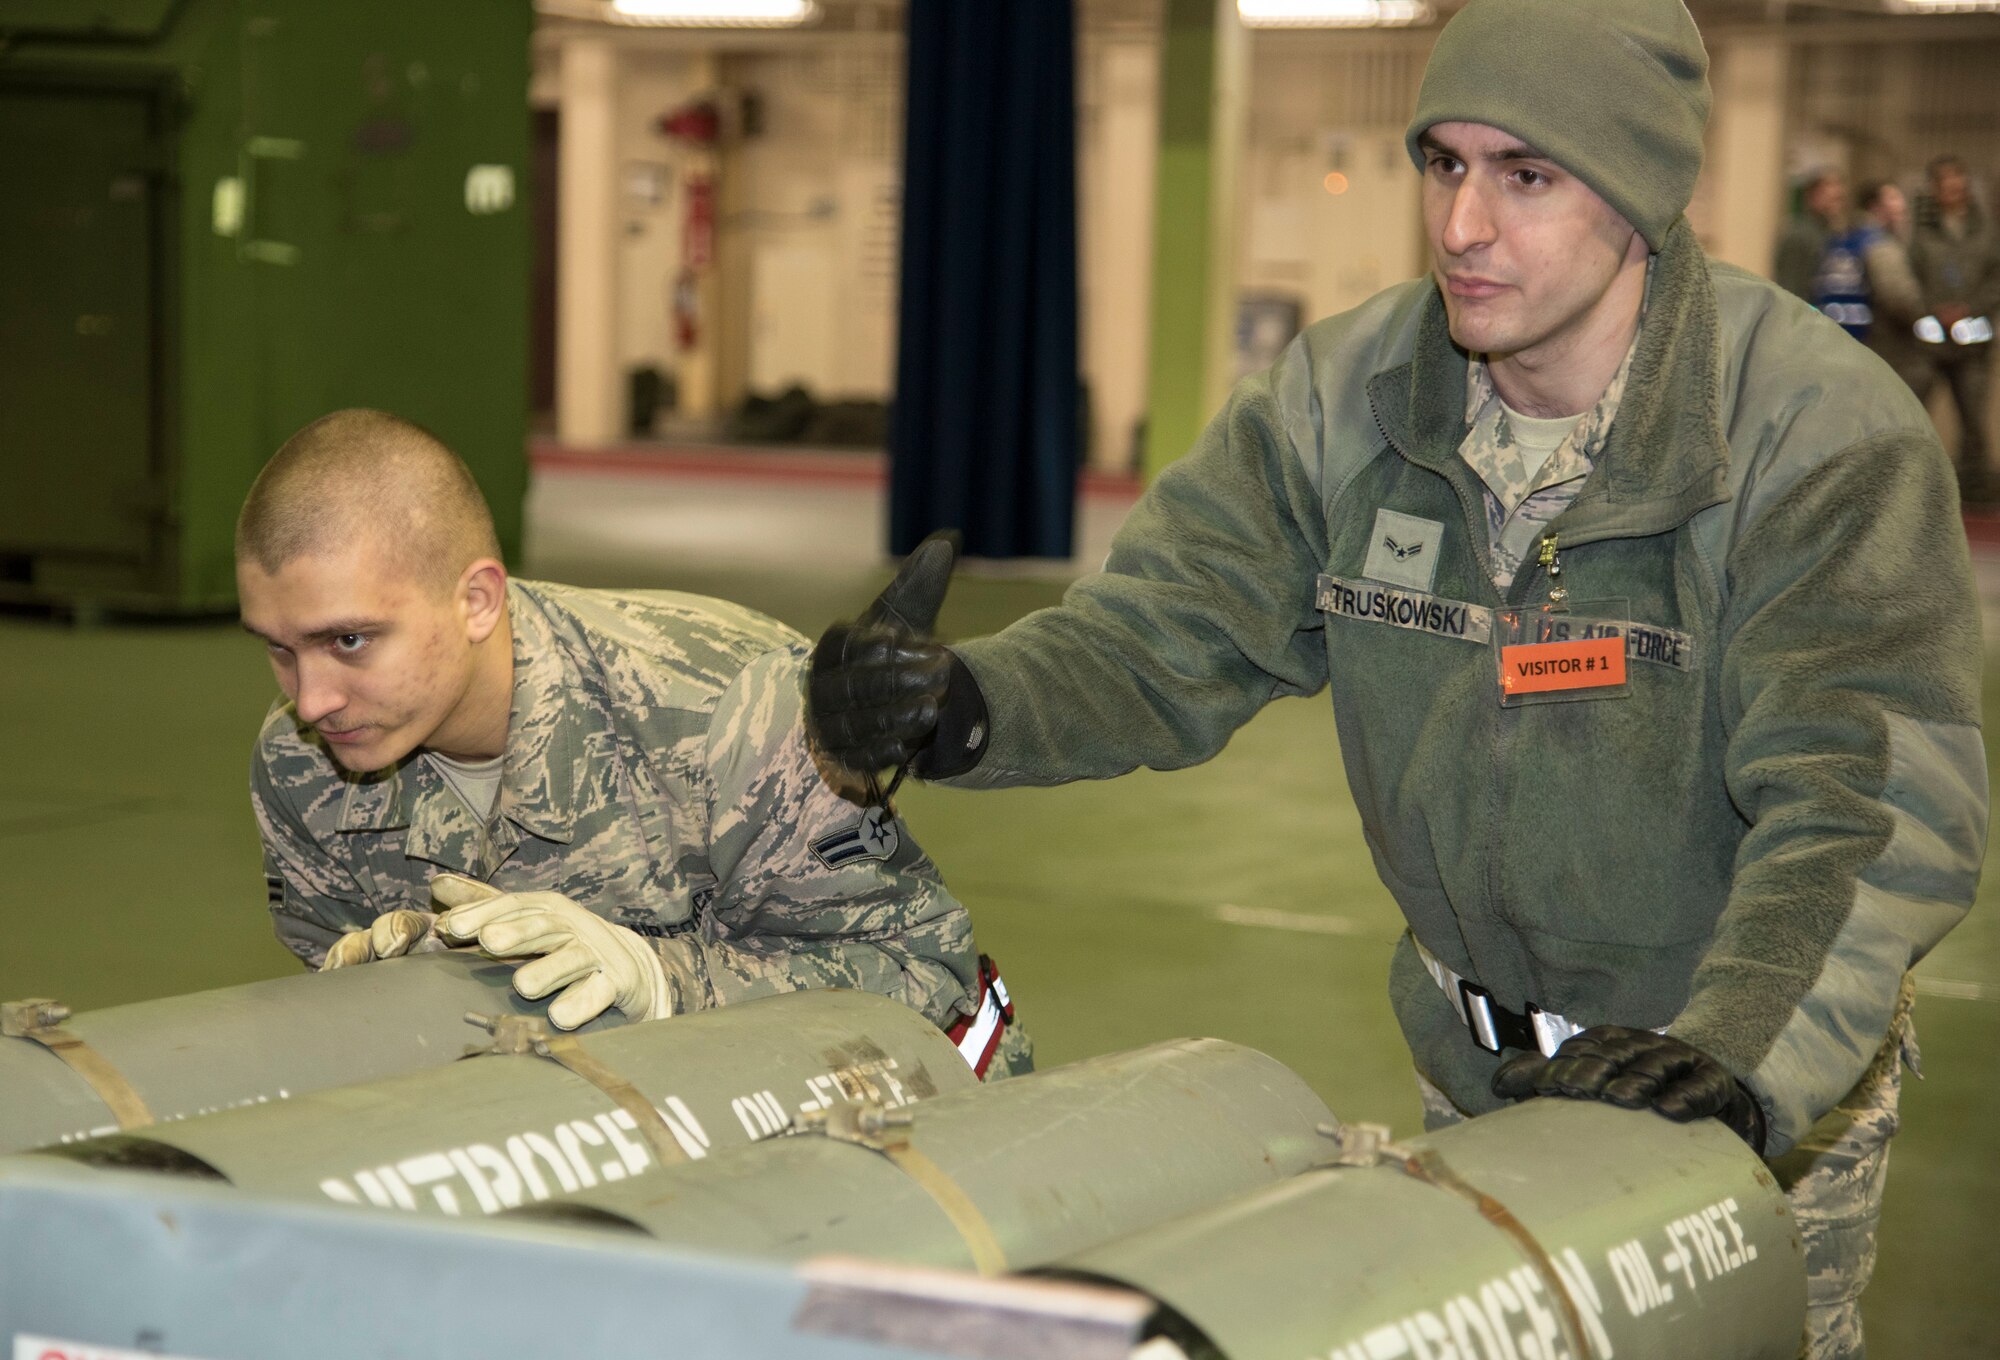 U.S. Air Force Airman 1st Class Jordan Herring, a 35th Medical Support Squadron logistician, left, and Airman 1st Class Truskowski, 35th Logistics Readiness Squadron vehicle and equipment mechanic apprentice, right, move cargo onto a scale at Misawa Air Base, Japan, March 15, 2016. Cargo is weighed to ensure proper balance on transport aircraft. (U.S. Air Force photo by Airman 1st Class Jordyn Fetter)